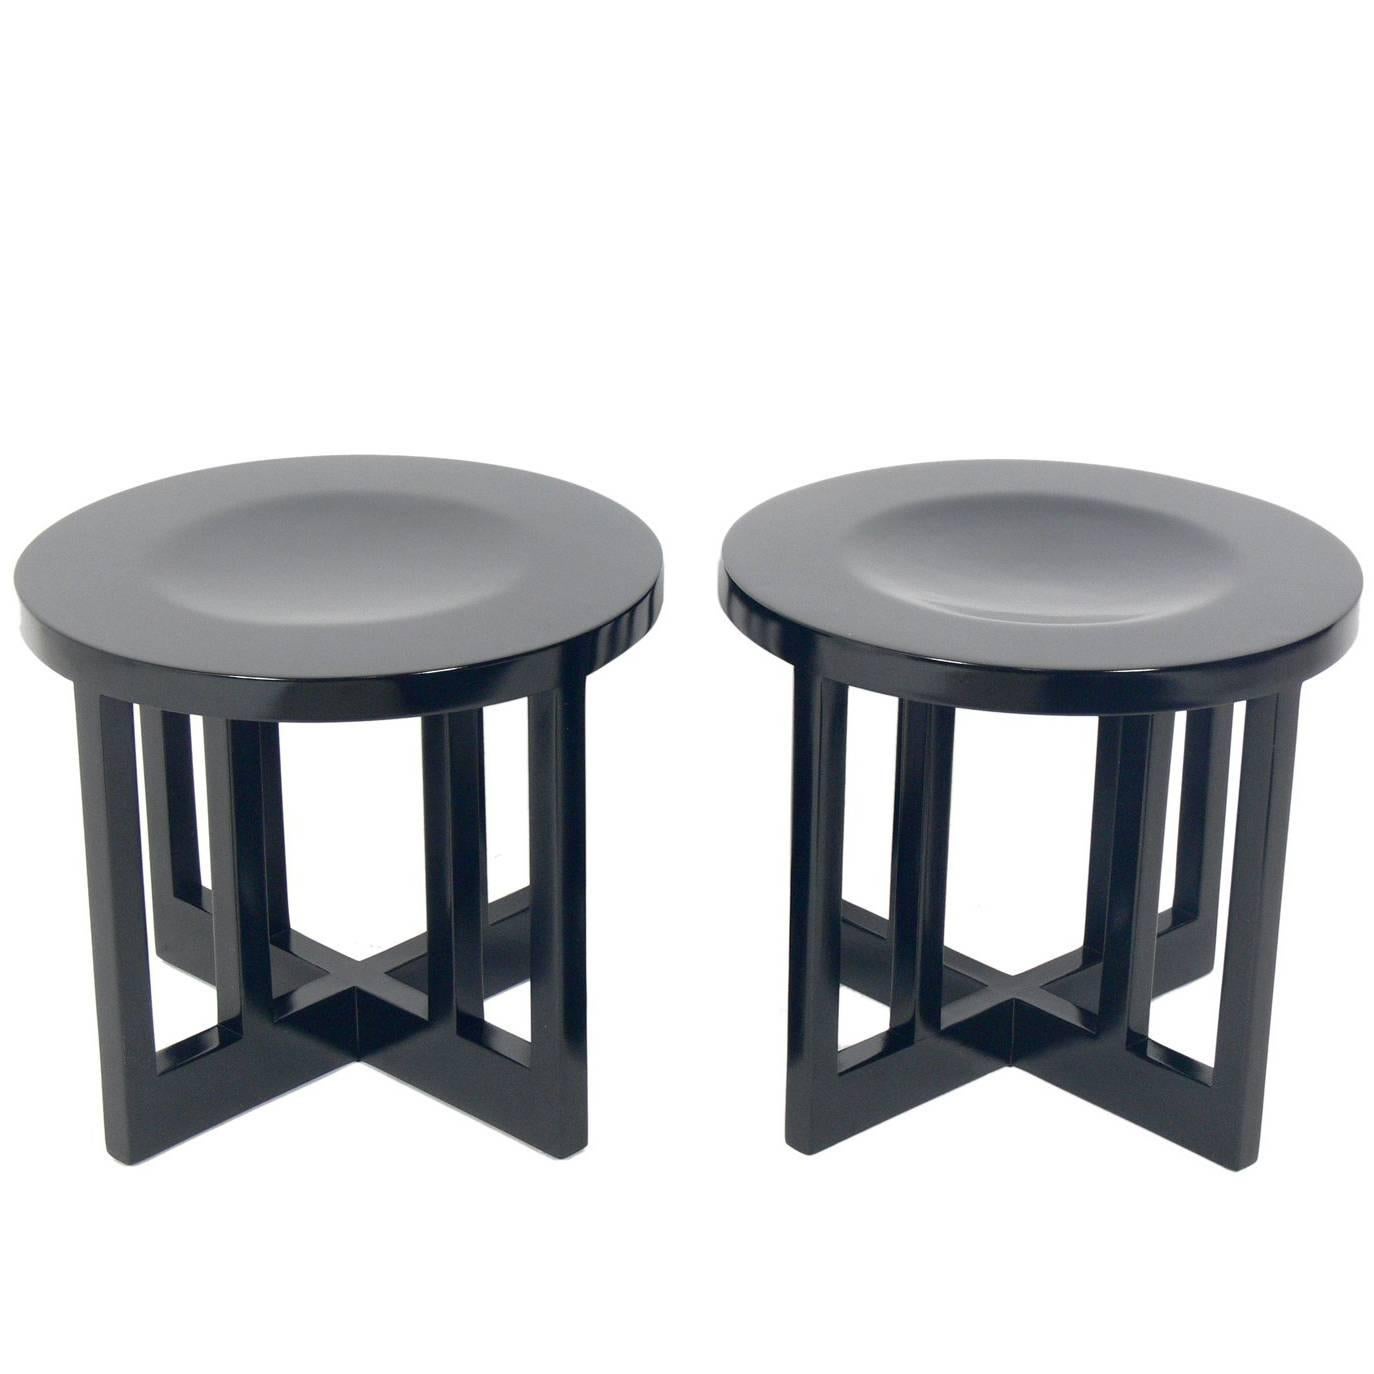 Pair of Architectural Stools by Richard Meier for Knoll